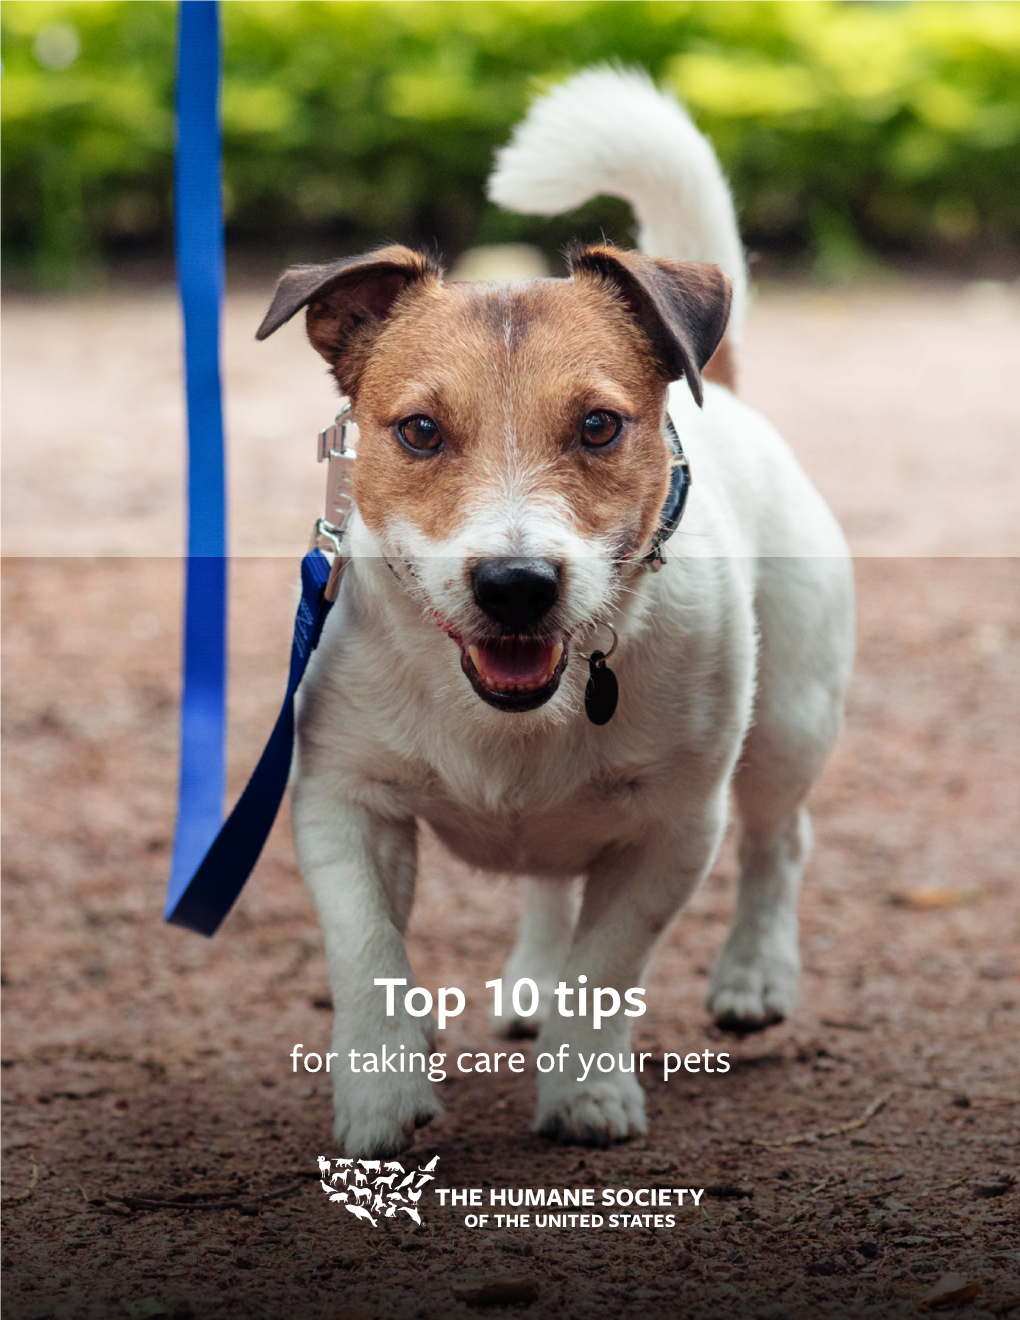 Top 10 Tips for Taking Care of Your Pets Copyright © 2020 by the Humane Society of the United States